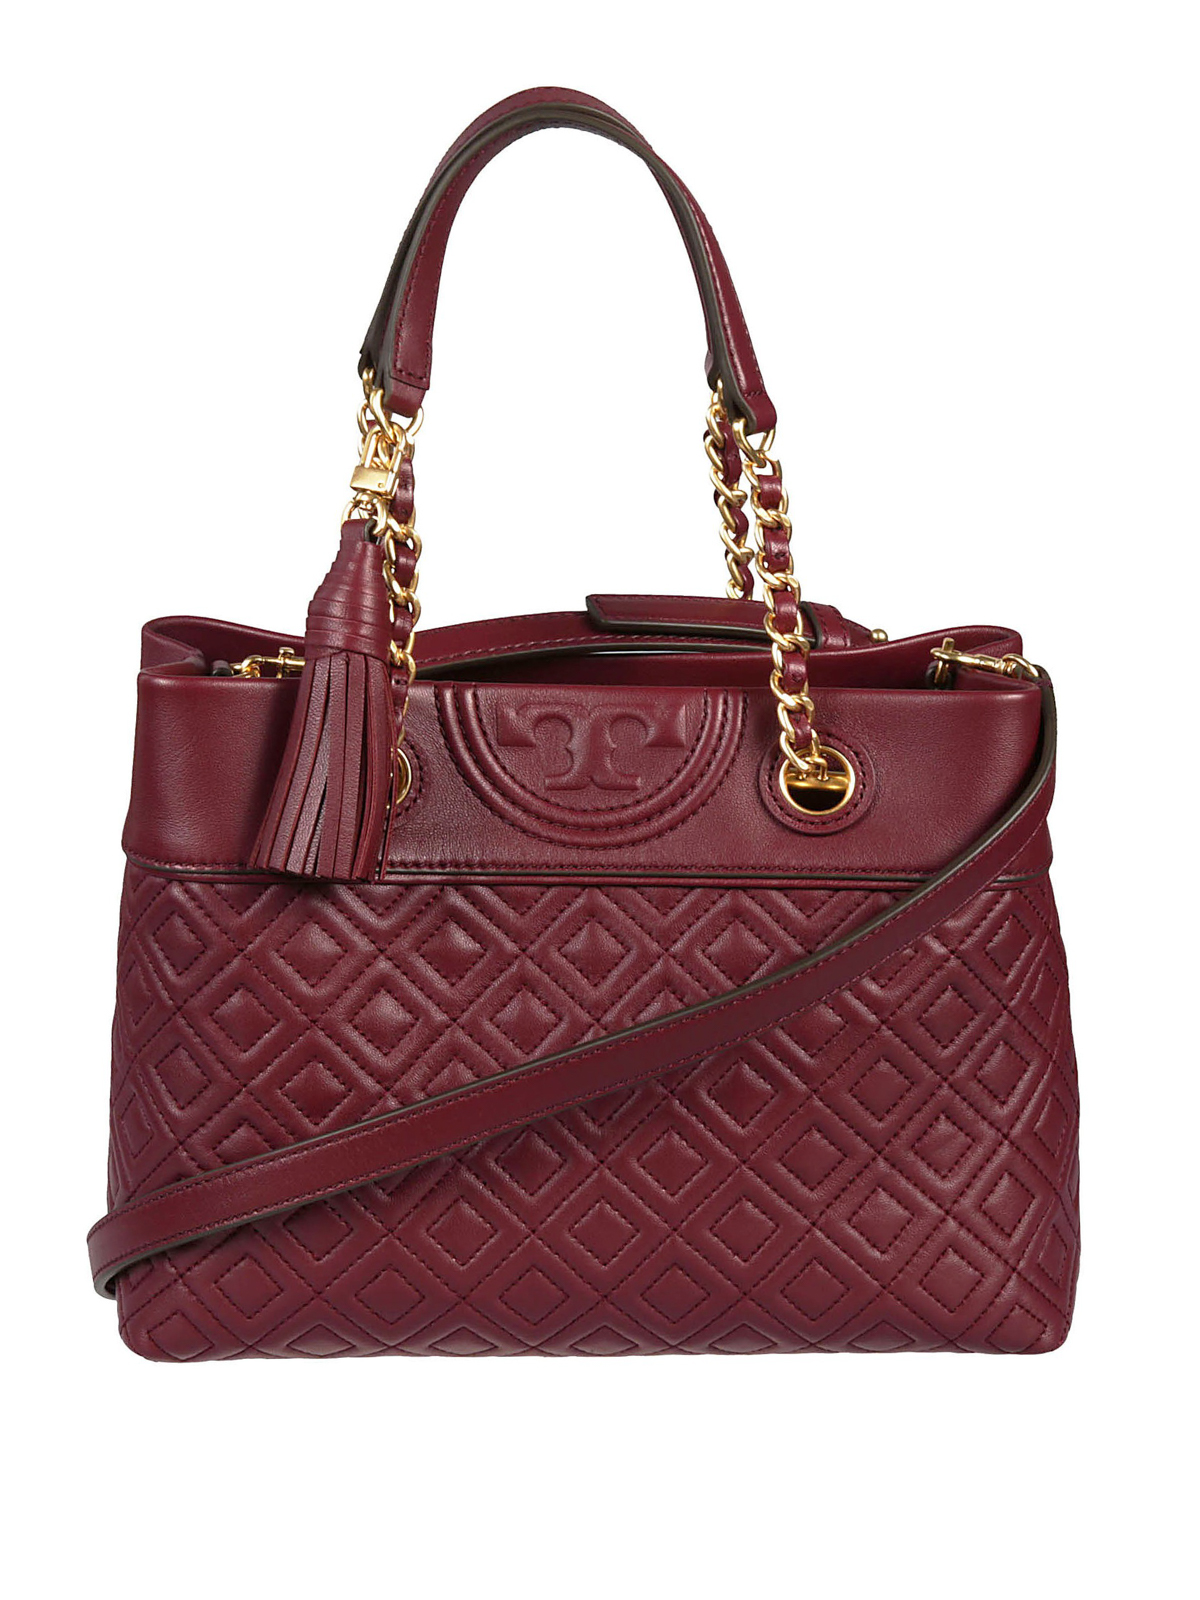 Totes bags Tory Burch - Fleming small burgundy leather tote - 48892609